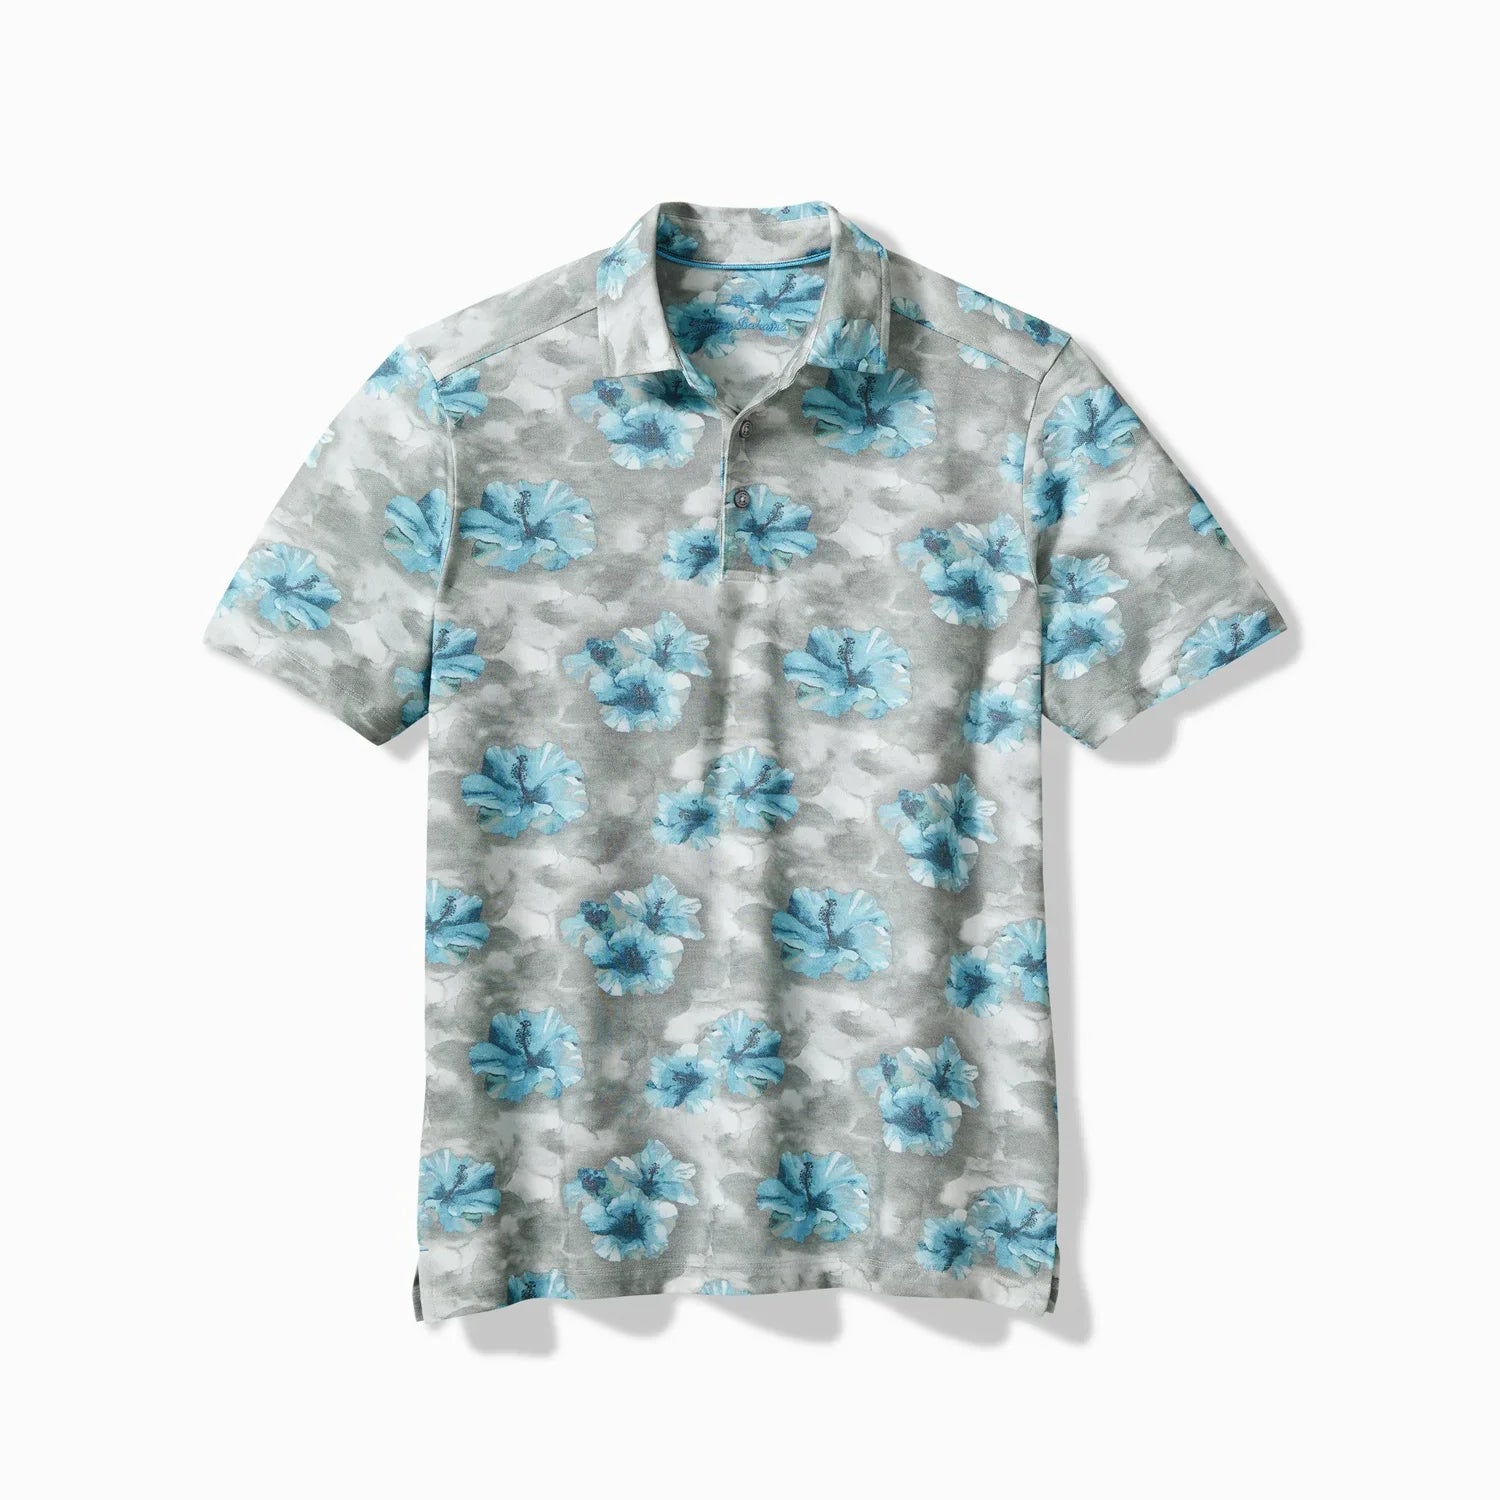 'Tommy Bahama Stormy Blues IslandZone Polo' in 'New Silver' colour